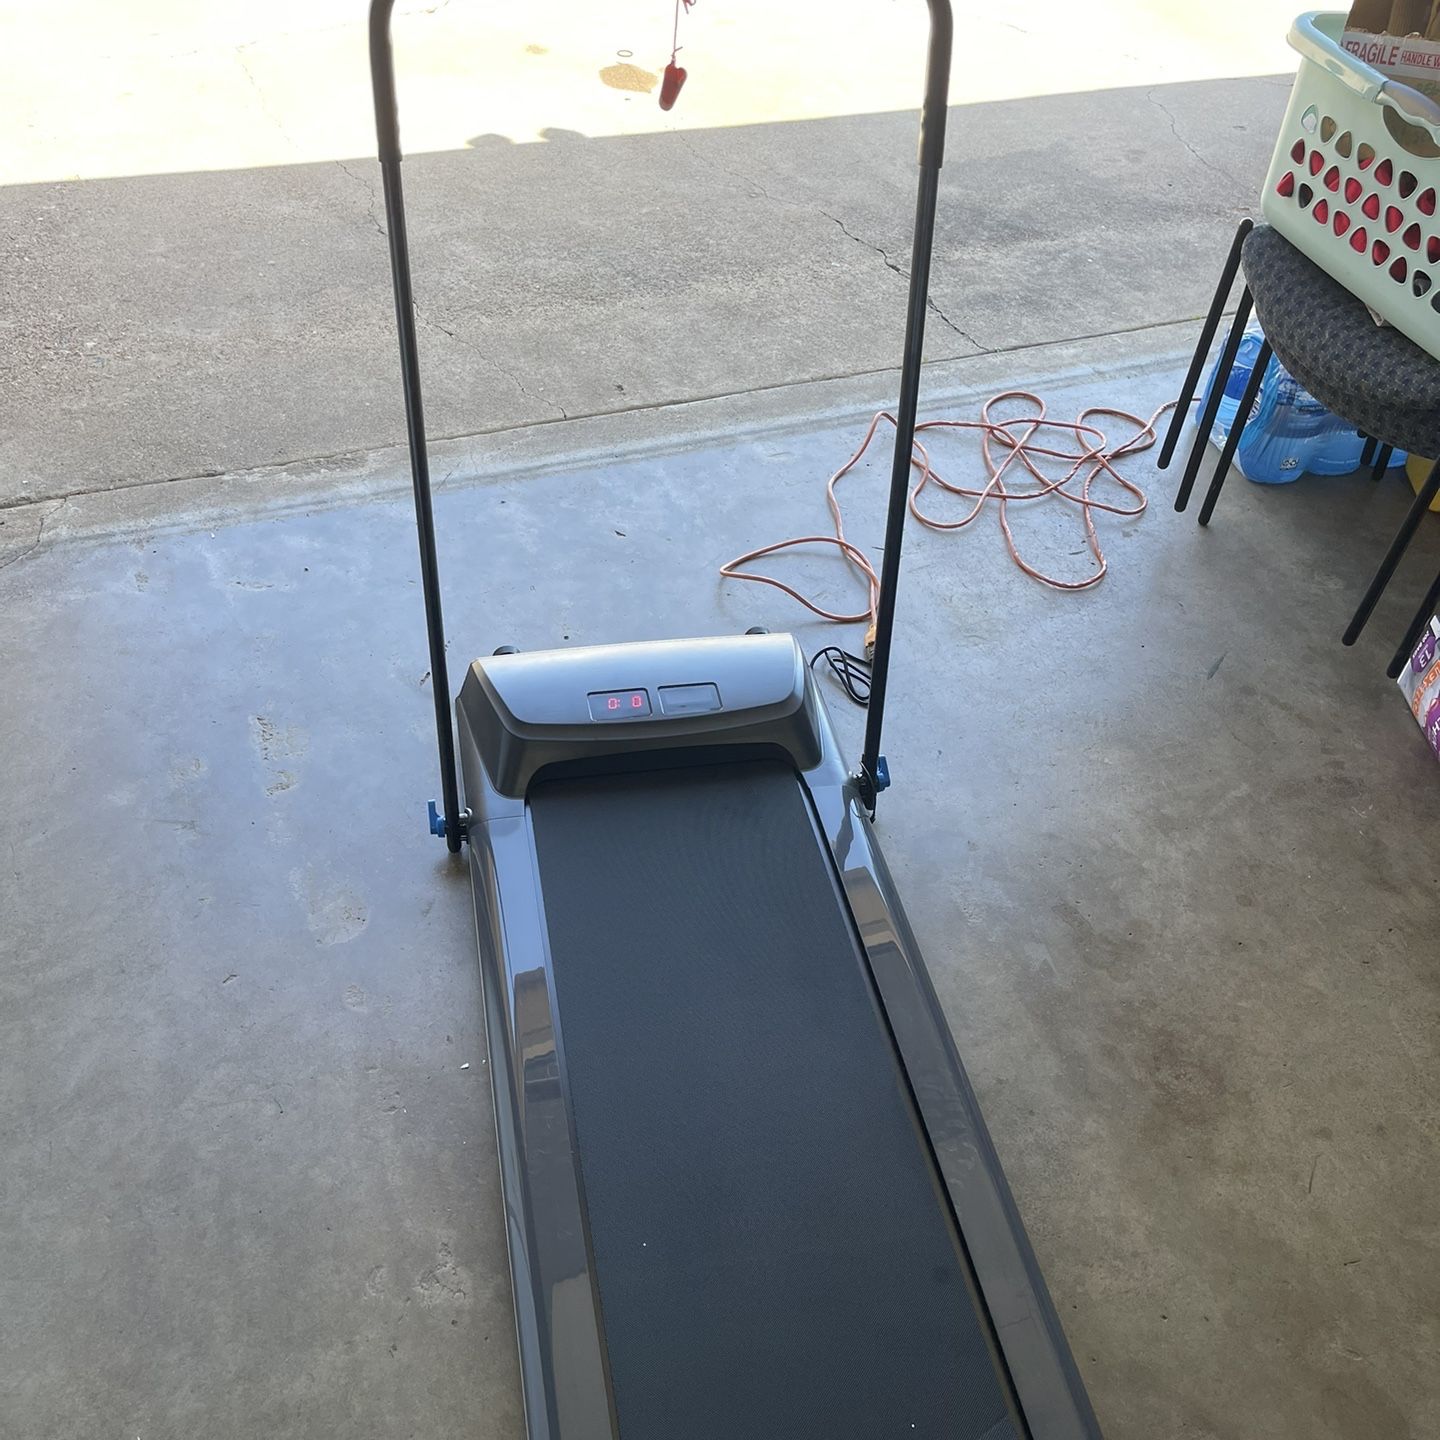 Treadmill NQ-40 Brand New Out Of Box . Small